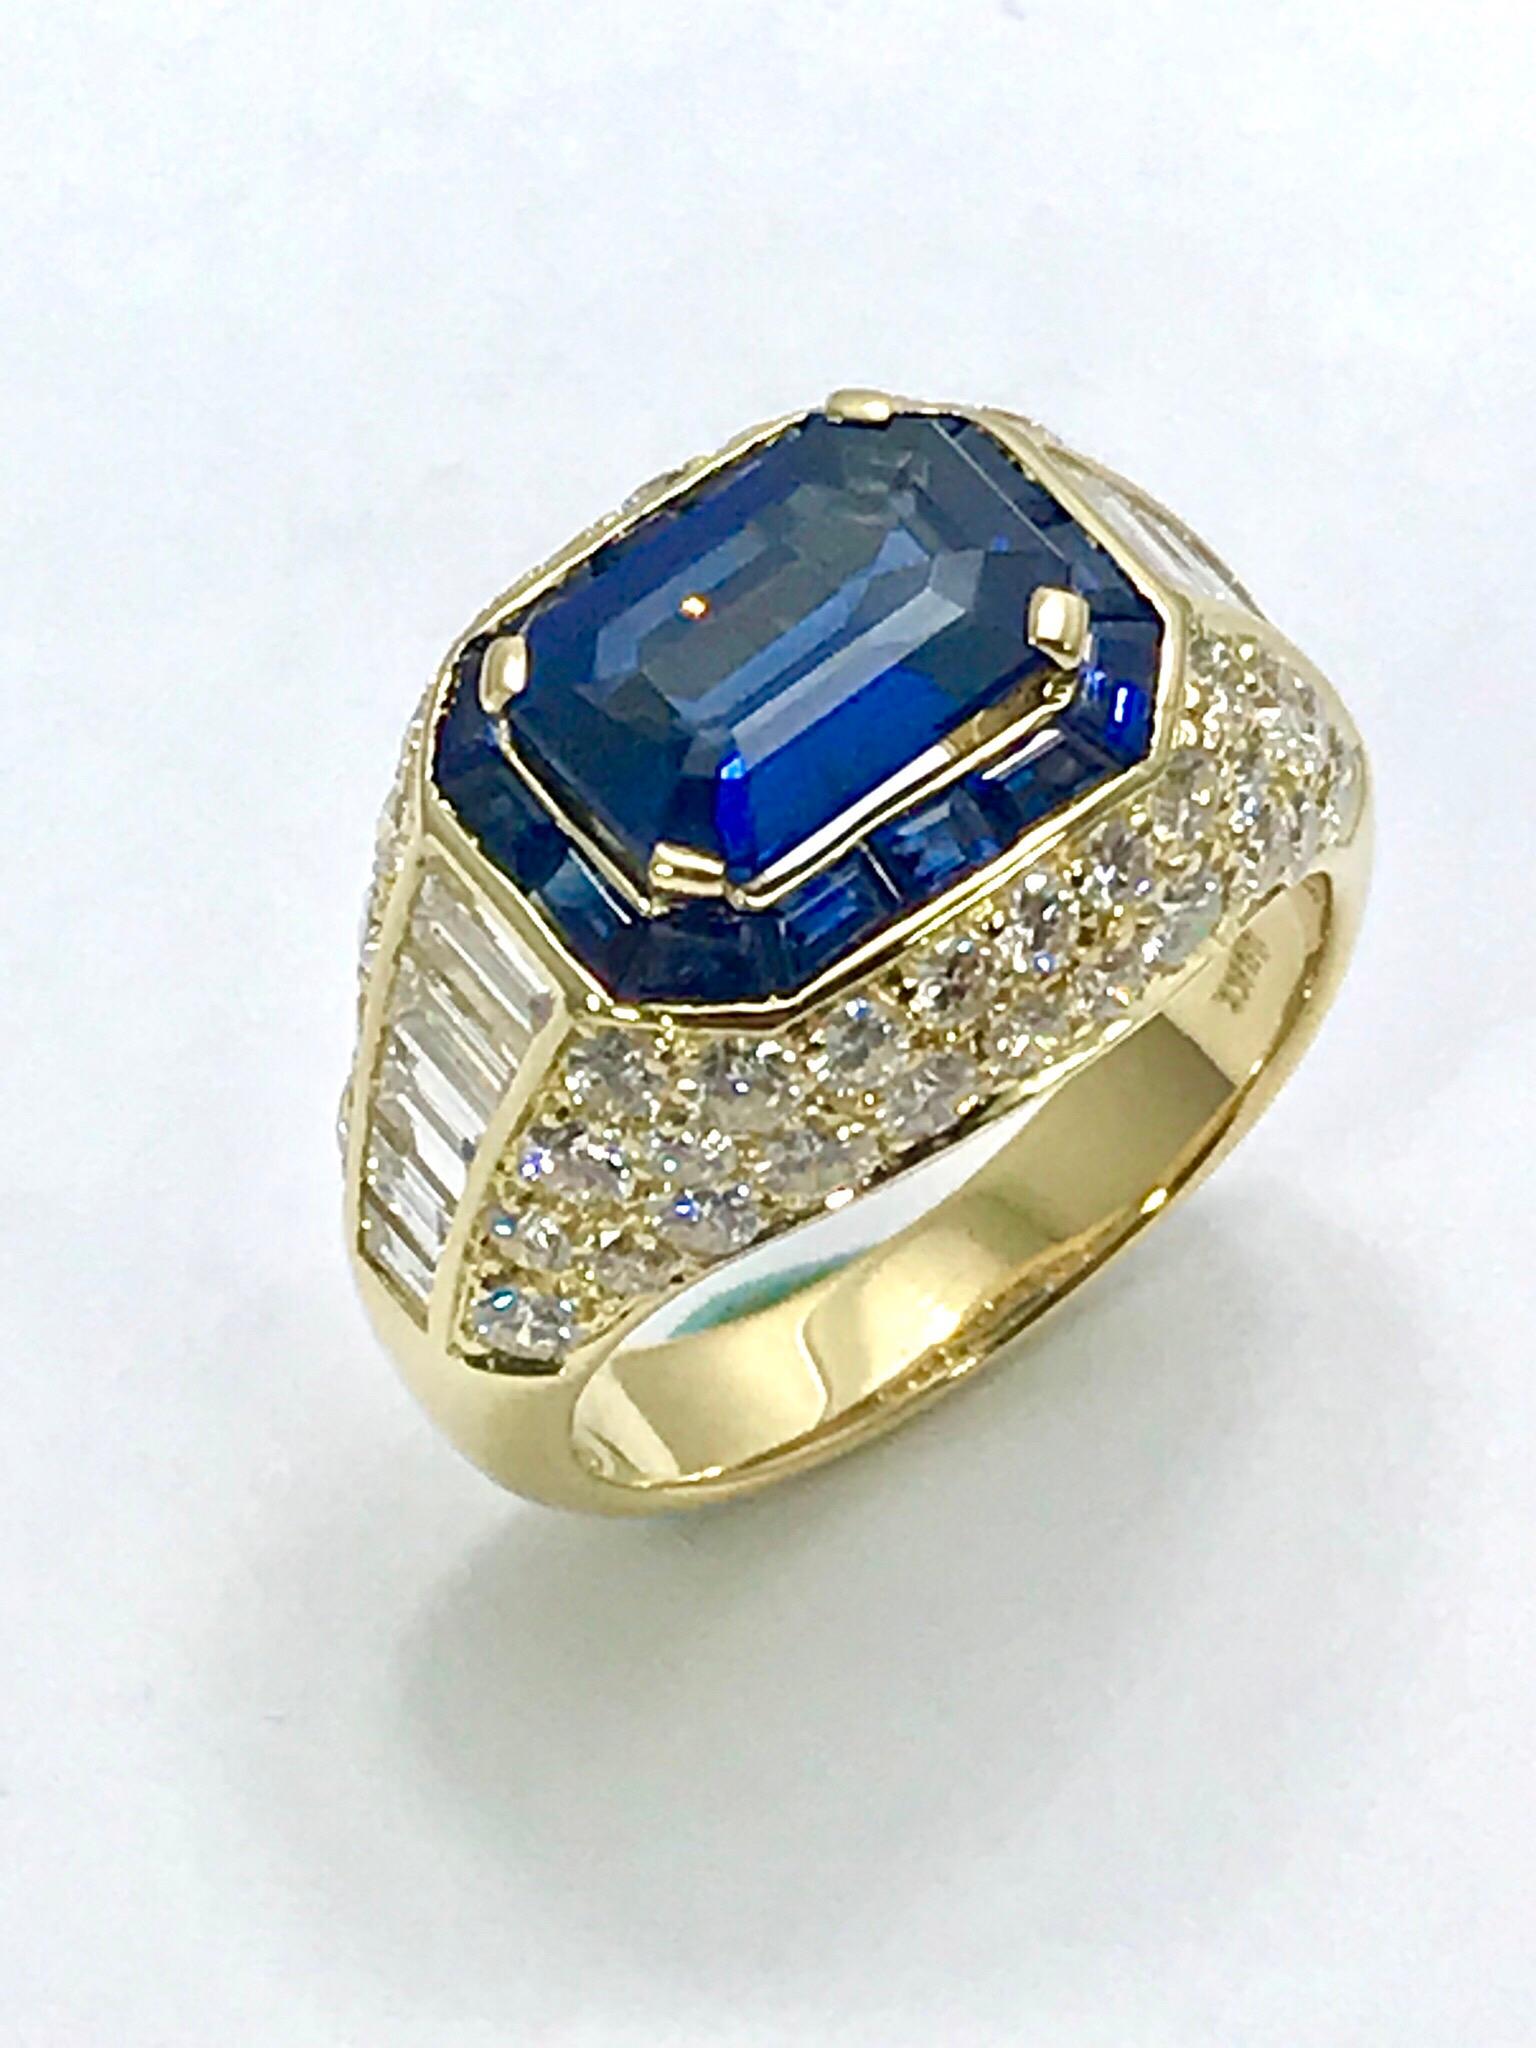 This is a stunning Picchiotti 2.48 carat emerald cut Sapphire and Diamond 18 karat yellow gold ring!  The center Sapphire is set with four prongs, framed by a single row of channel set Sapphires.  On either side of the center is a waterfall of